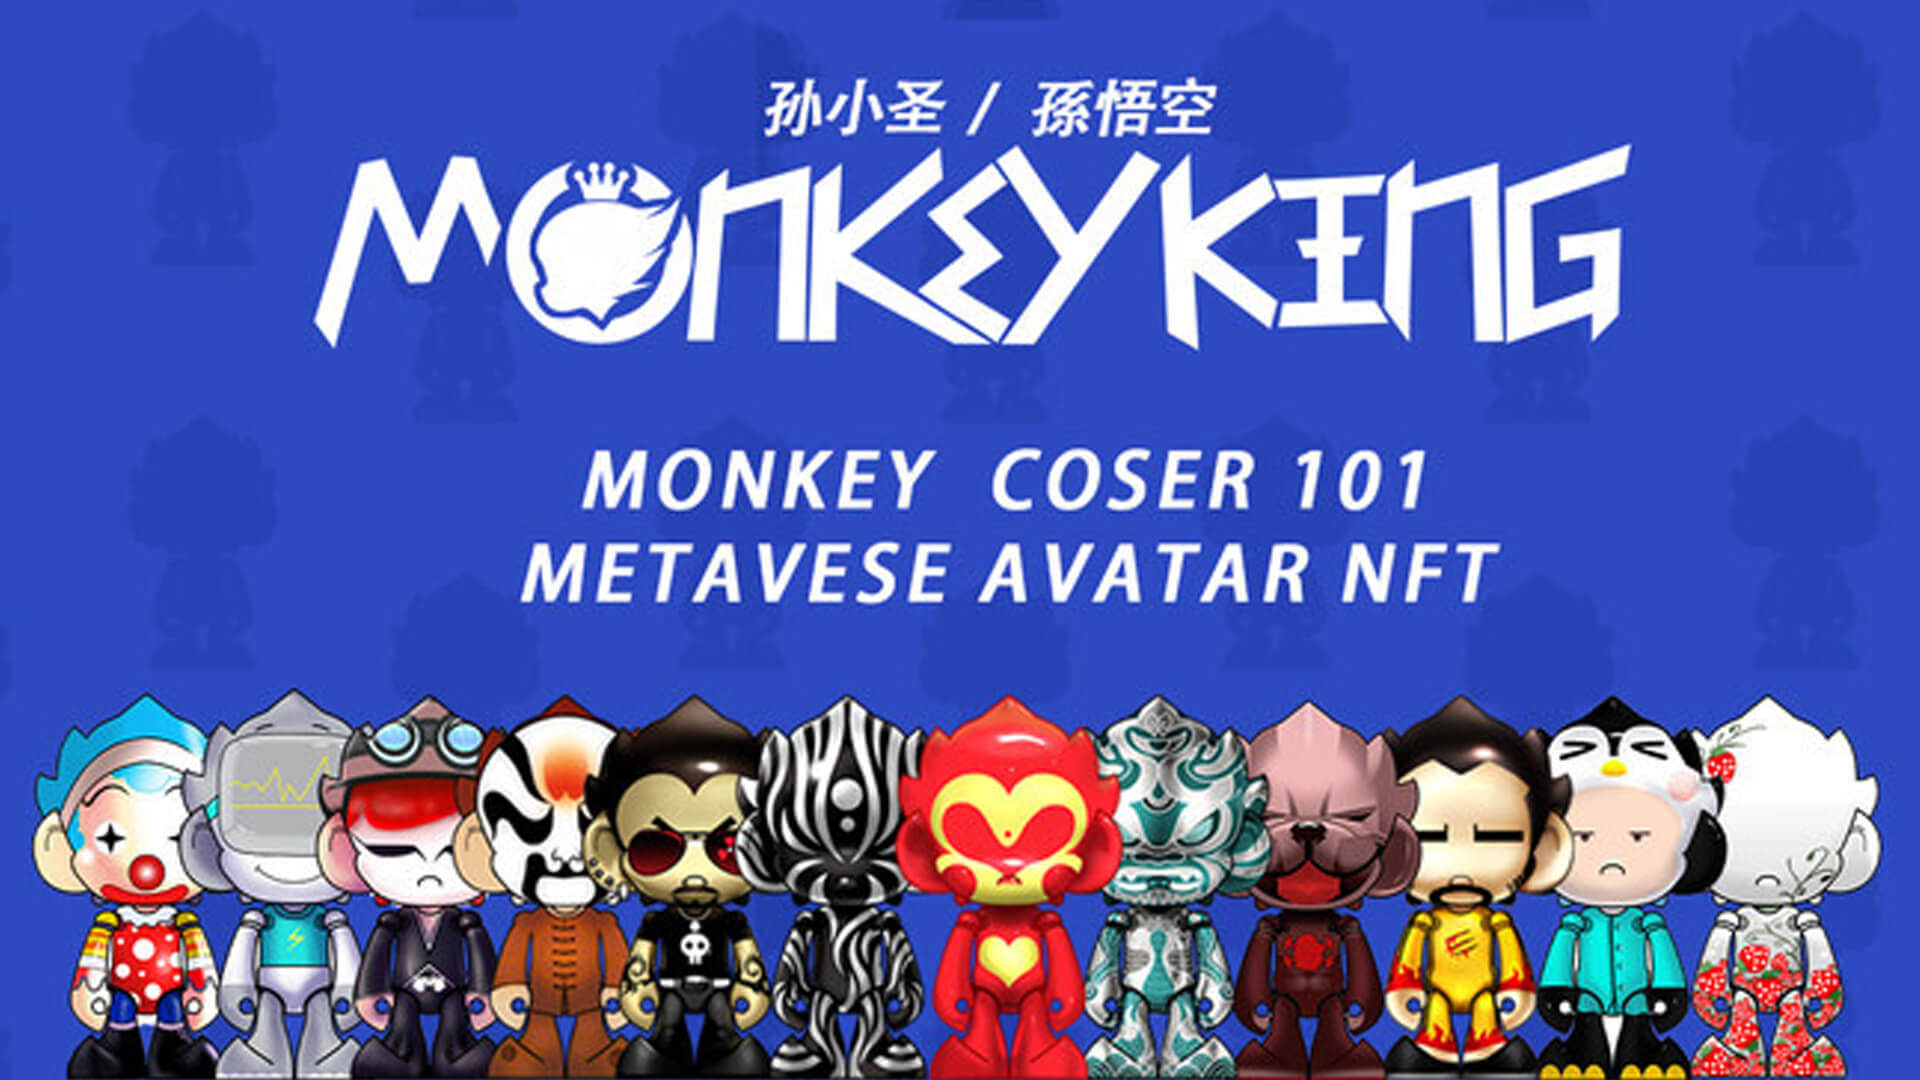 Popular NFT series from China Monkey King (Metaverse Avatar NFT) sold out in 1 minute will be released from XANALIA